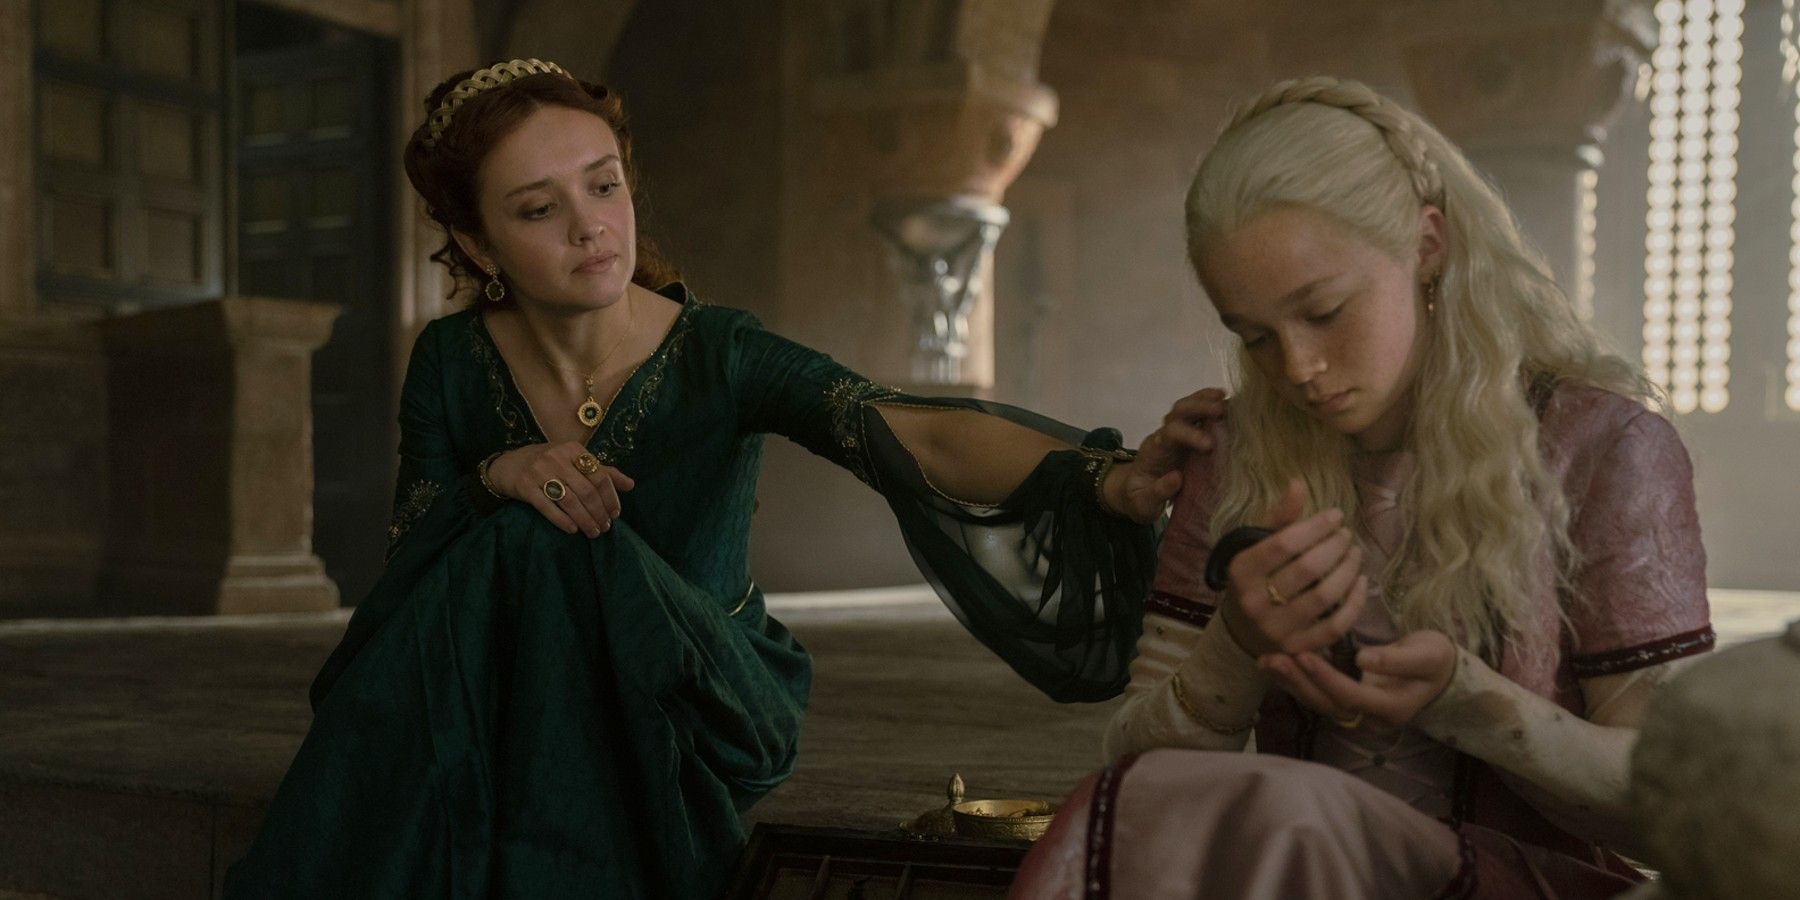 Alicent Hightower (Olivia Cooke) and Helaena Targaryen (Evie Allen) in House of the Dragon